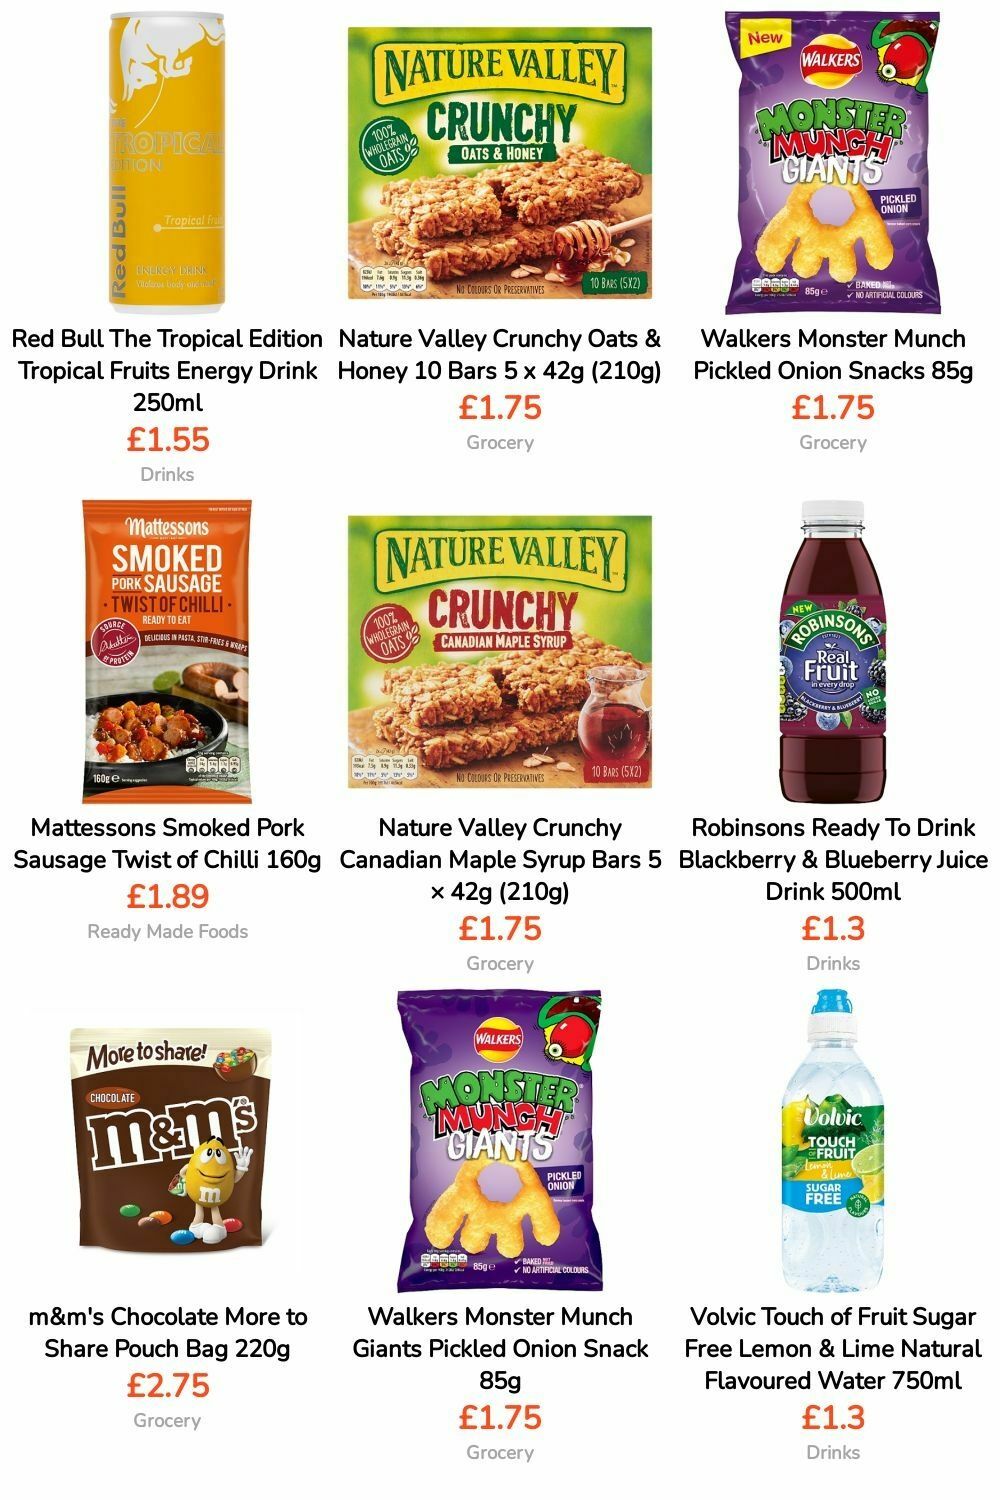 SPAR Offers from 22 March